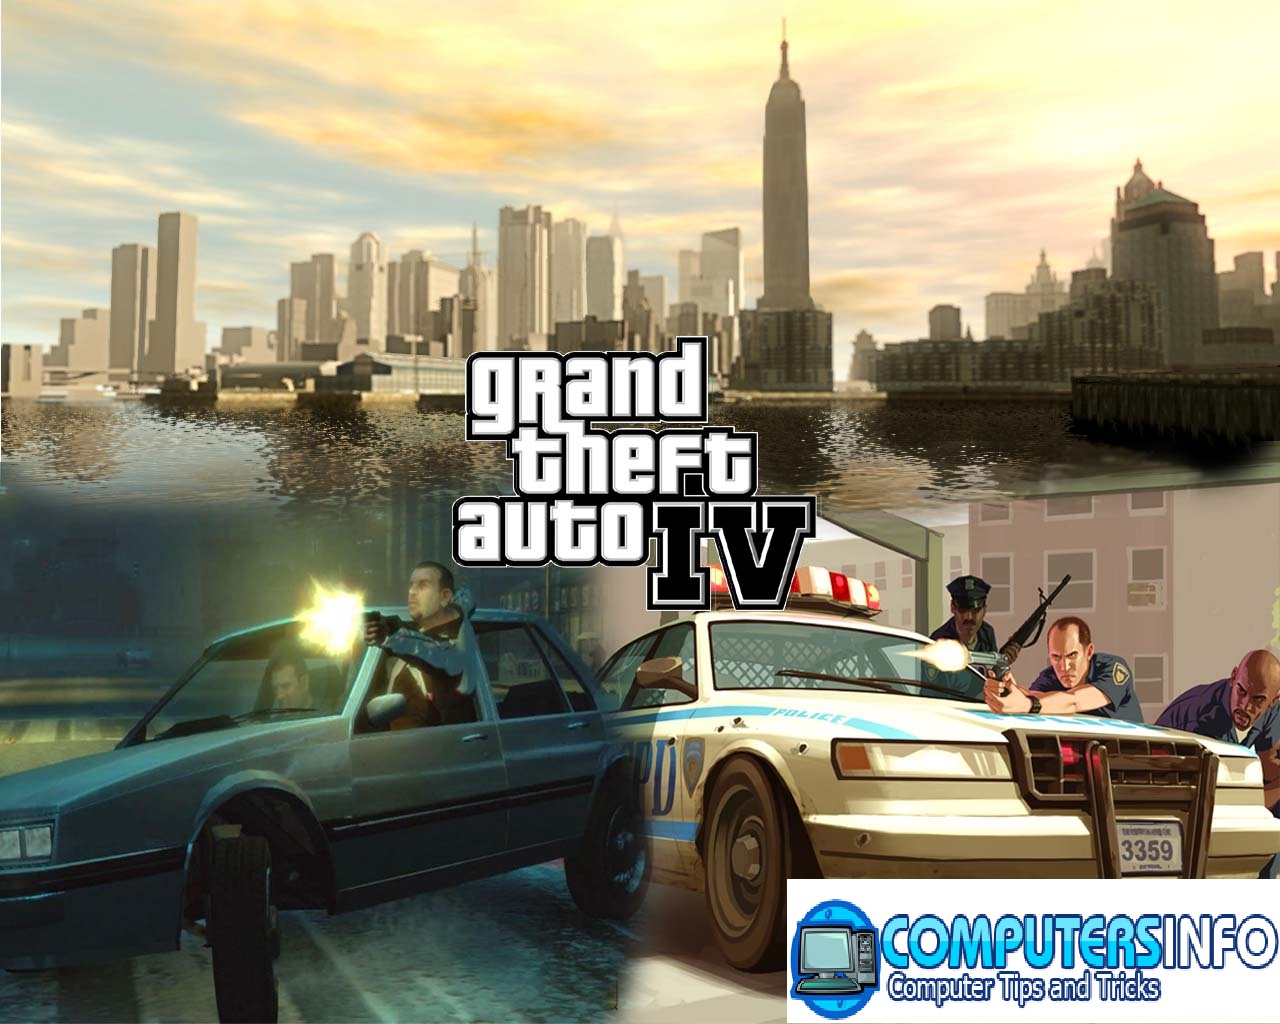 Gta 4 highly compressed at least 10mb